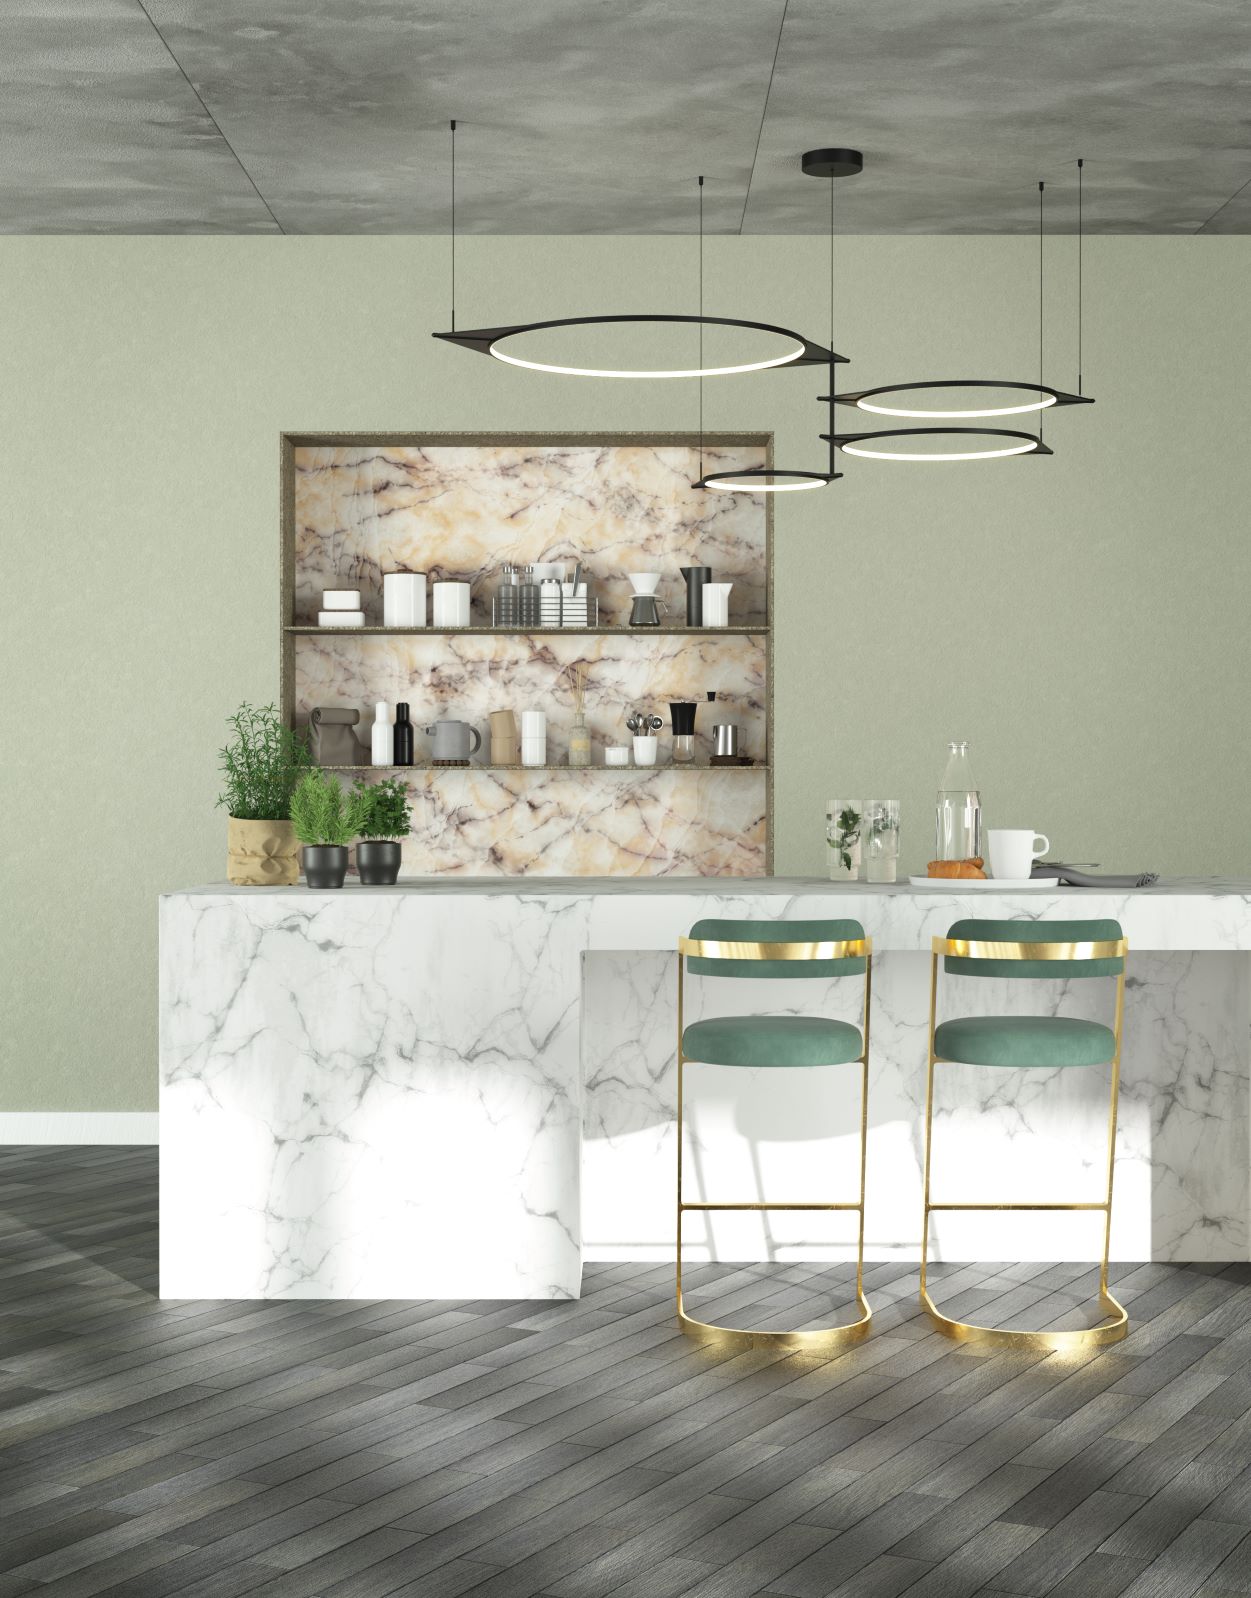 Serif LED Large Chandelier in a smaller kitchen setting.